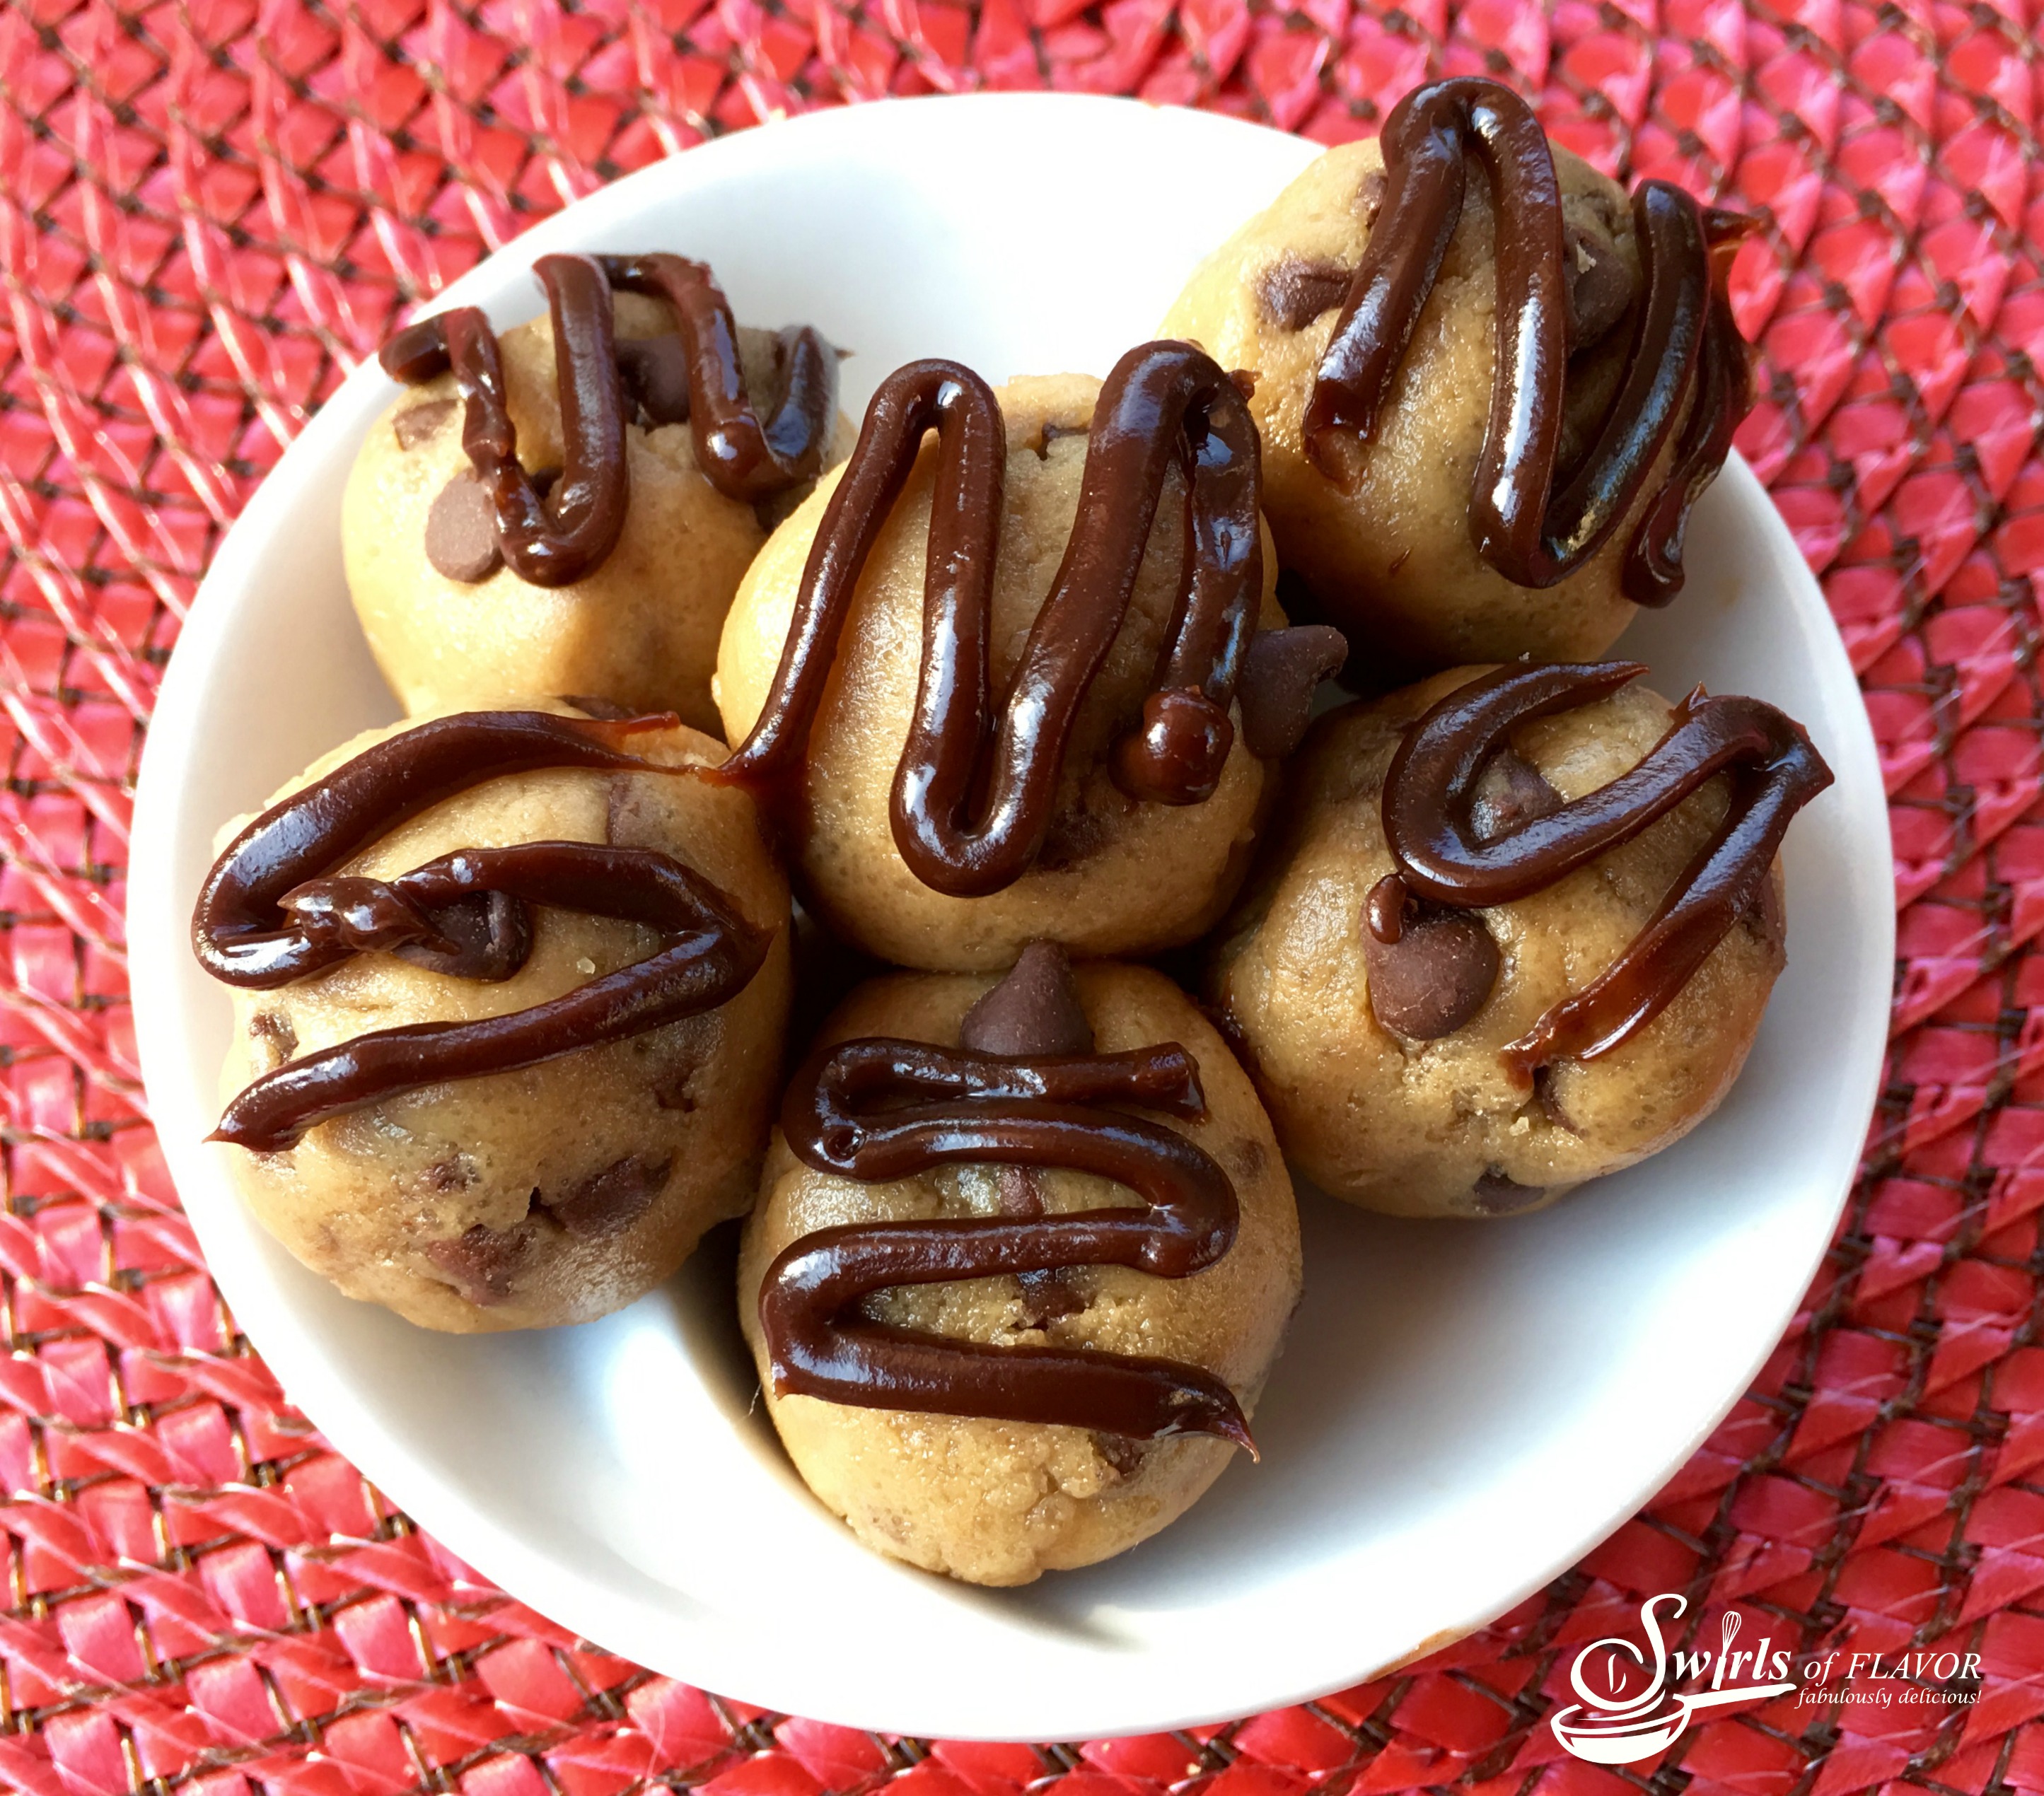 With just a few basic ingredients you can stir up a bowl of love in your kitchen today! No-Bake Chocolate Chip Cookie Bites are sure to please!